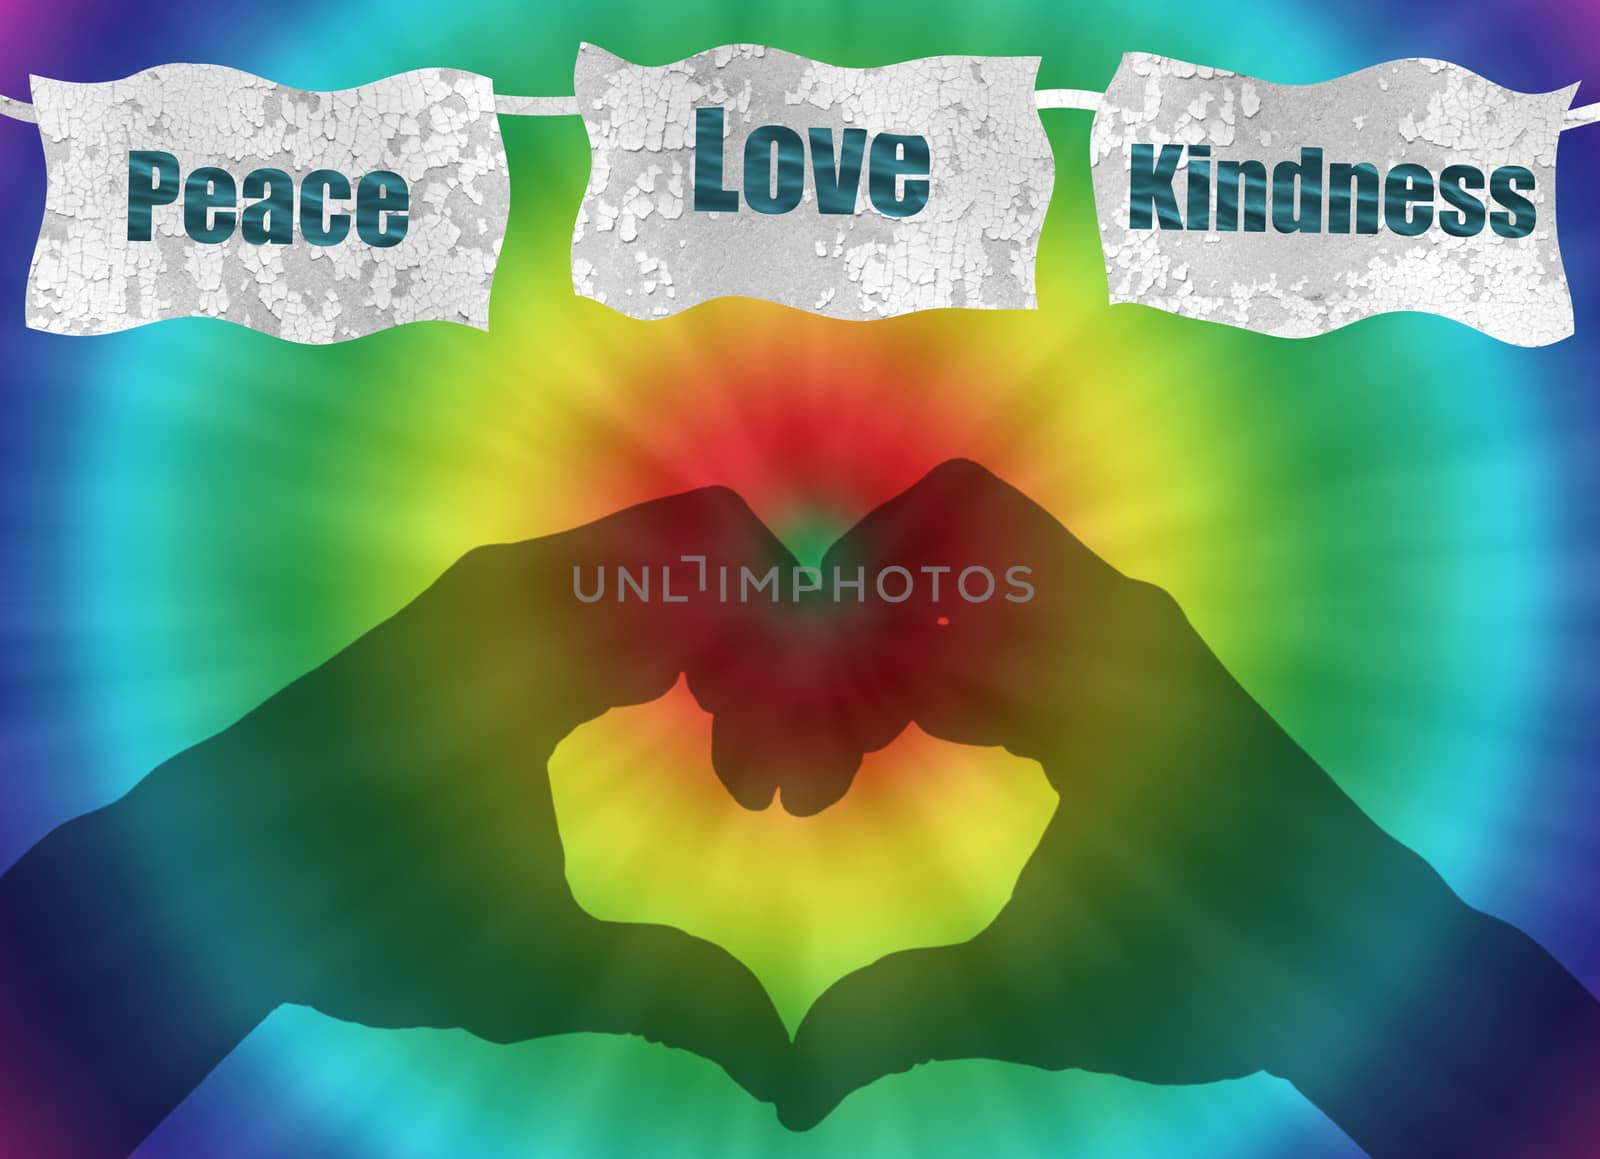 retro peace, love and kindness image with rainbow tie-dye